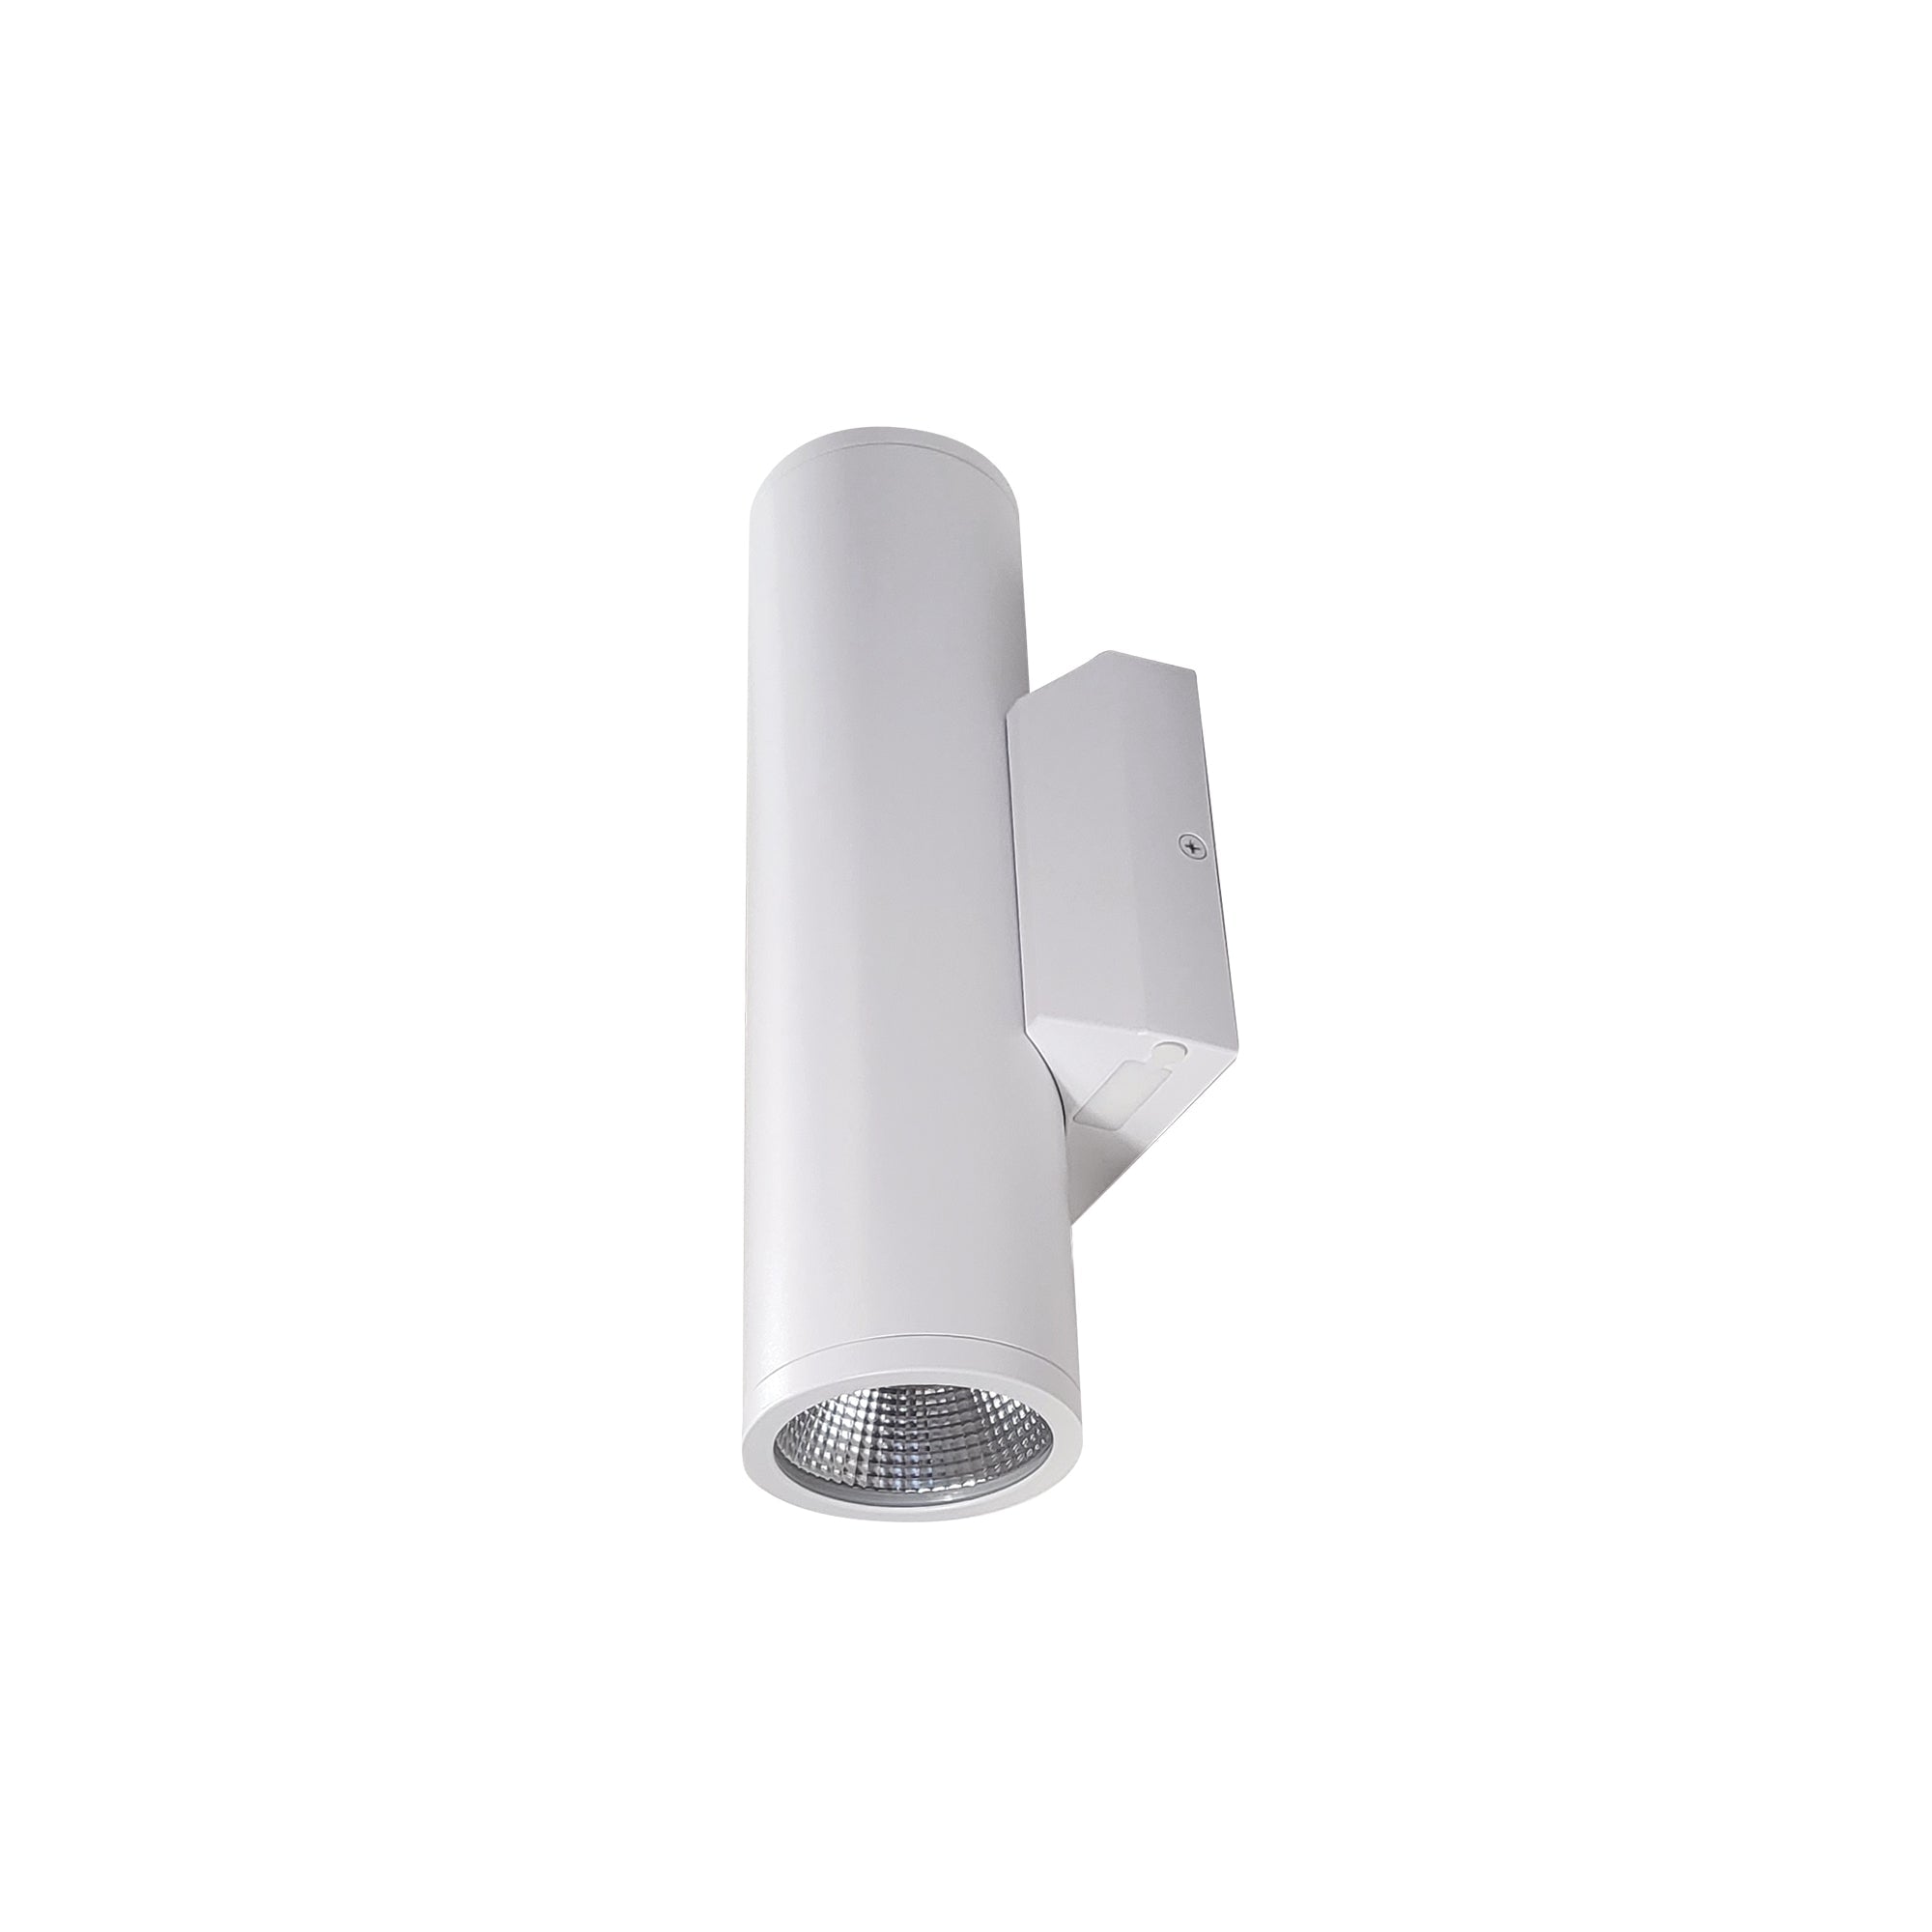 Nora Lighting NYUD-3L1345MPW - Cylinder - 3 Inch Up & Down Wall Mounted LED Cylinder with Selectable CCT, Matte Powder White finish